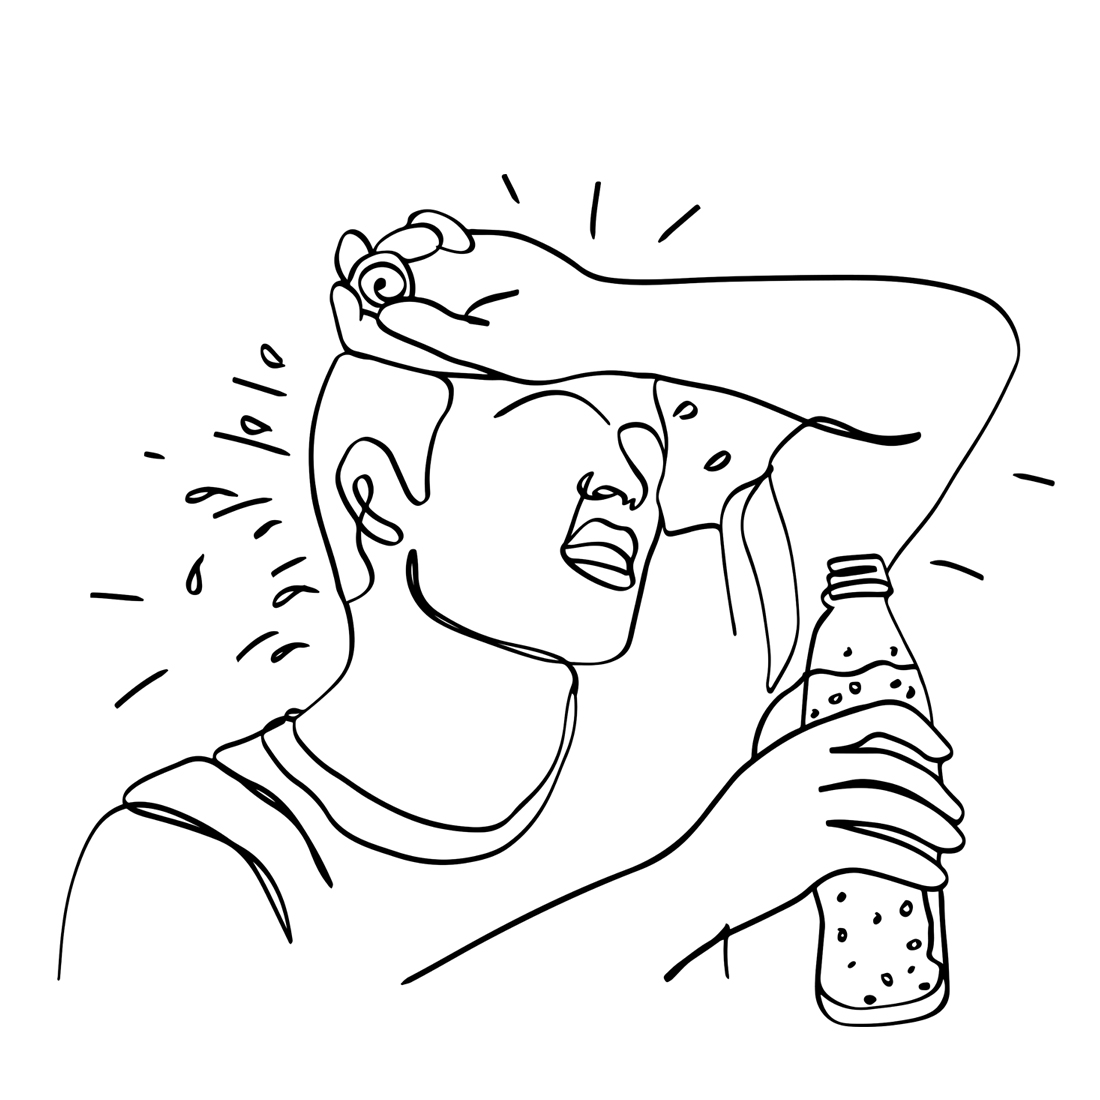 Heat Wave Fatigue: Cartoon Illustration of Exhausted Athlete with Water Bottle, Battling the Heat: Vector Image of Tired Sportsman Seeking Refreshment preview image.